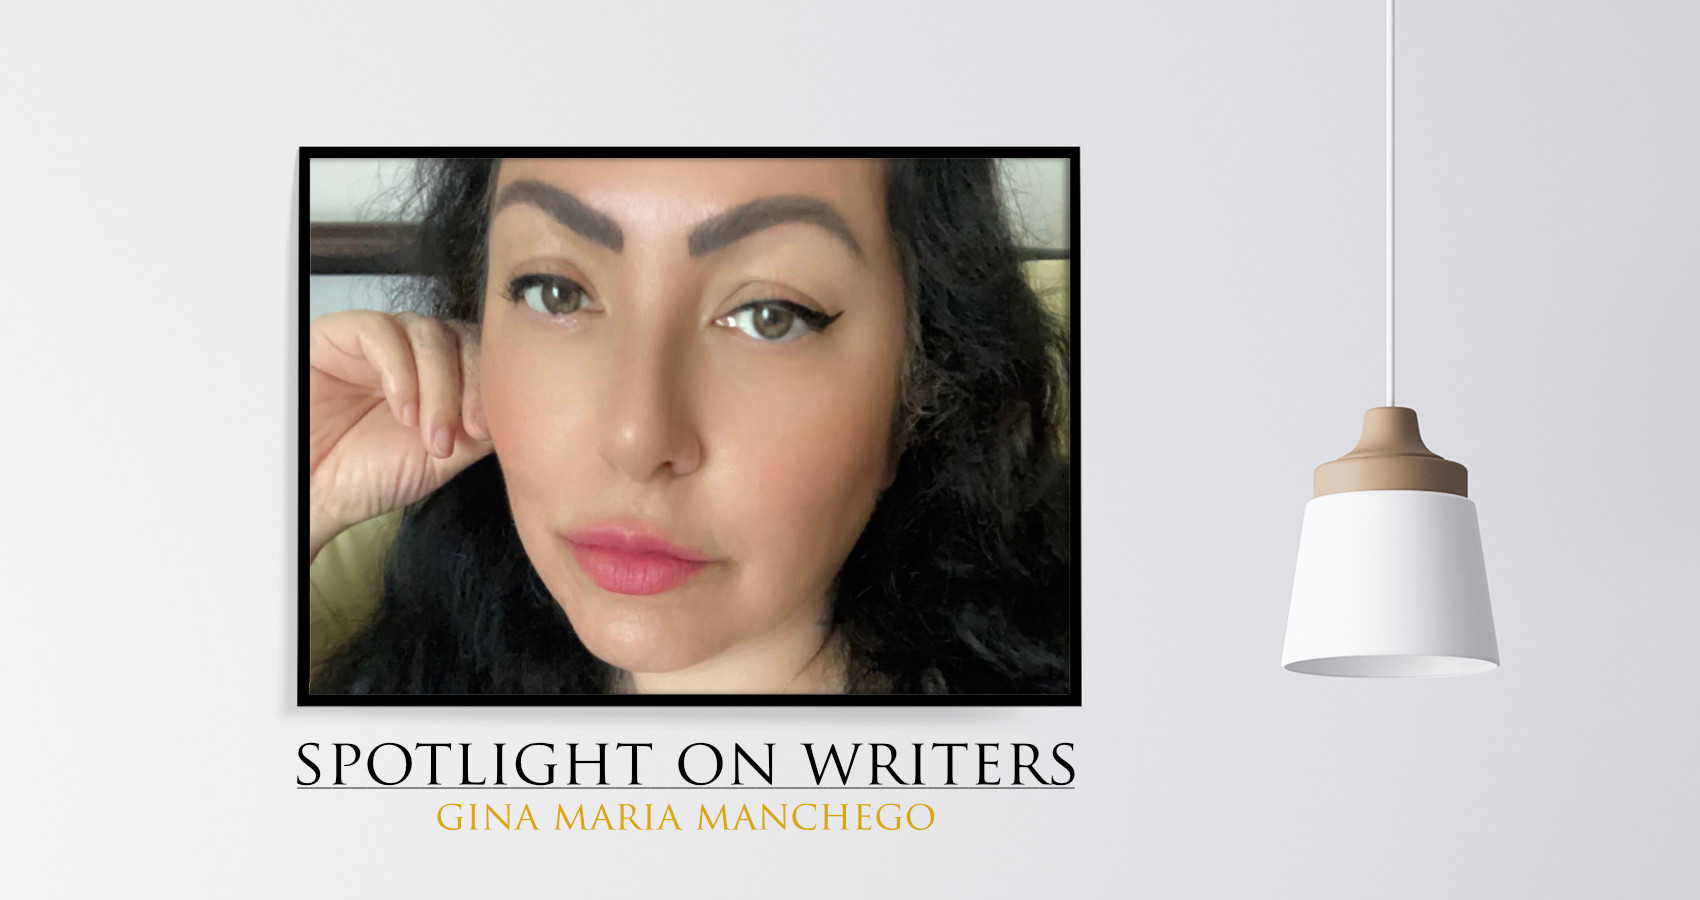 Spotlight On Writers - Gina Maria Manchego at Spillwords.com